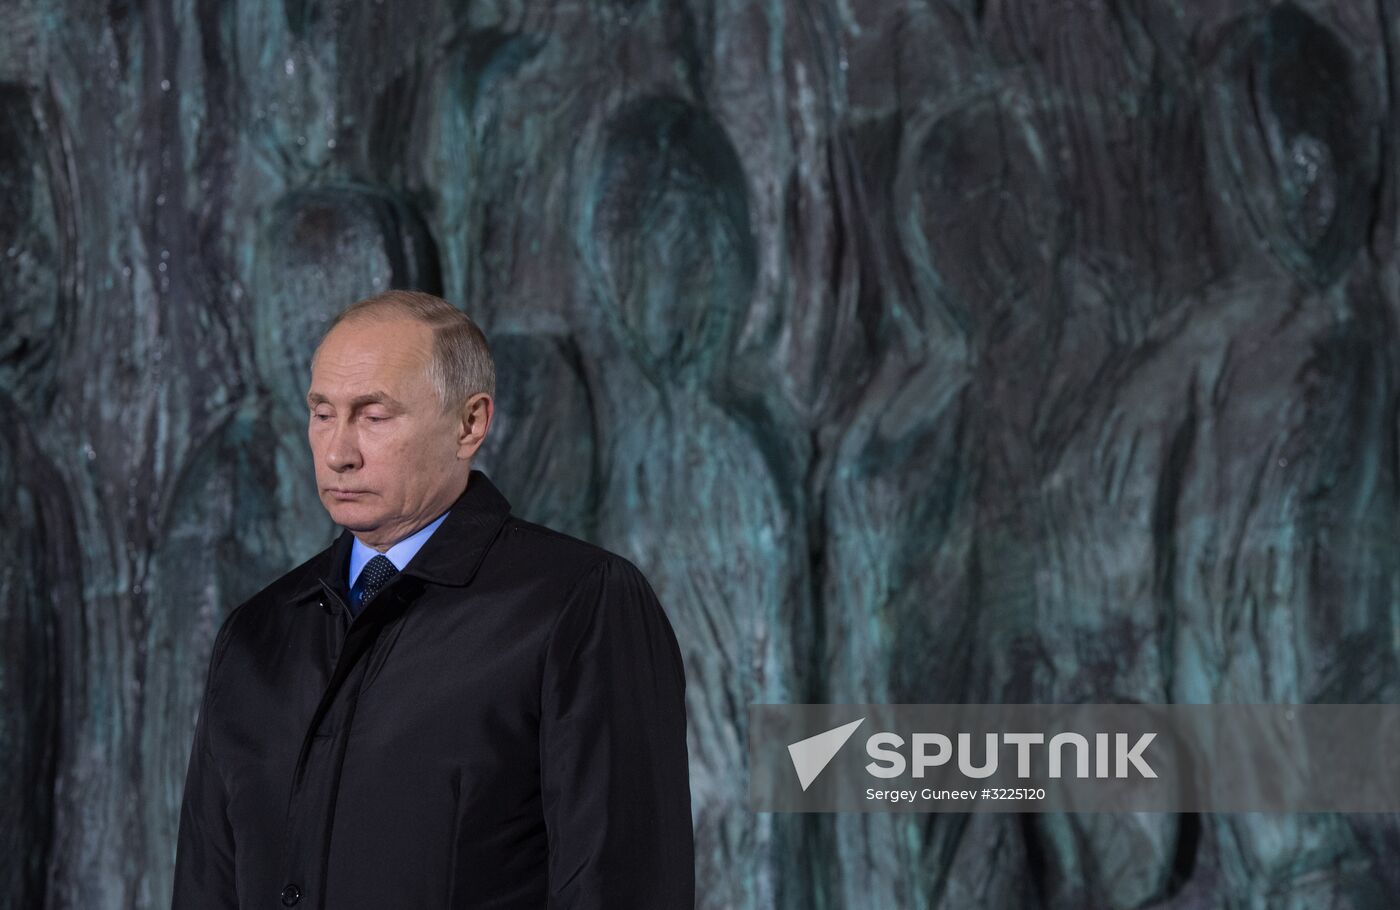 President Vladimir Putin attends unveiling of the Wall of Grief memorial